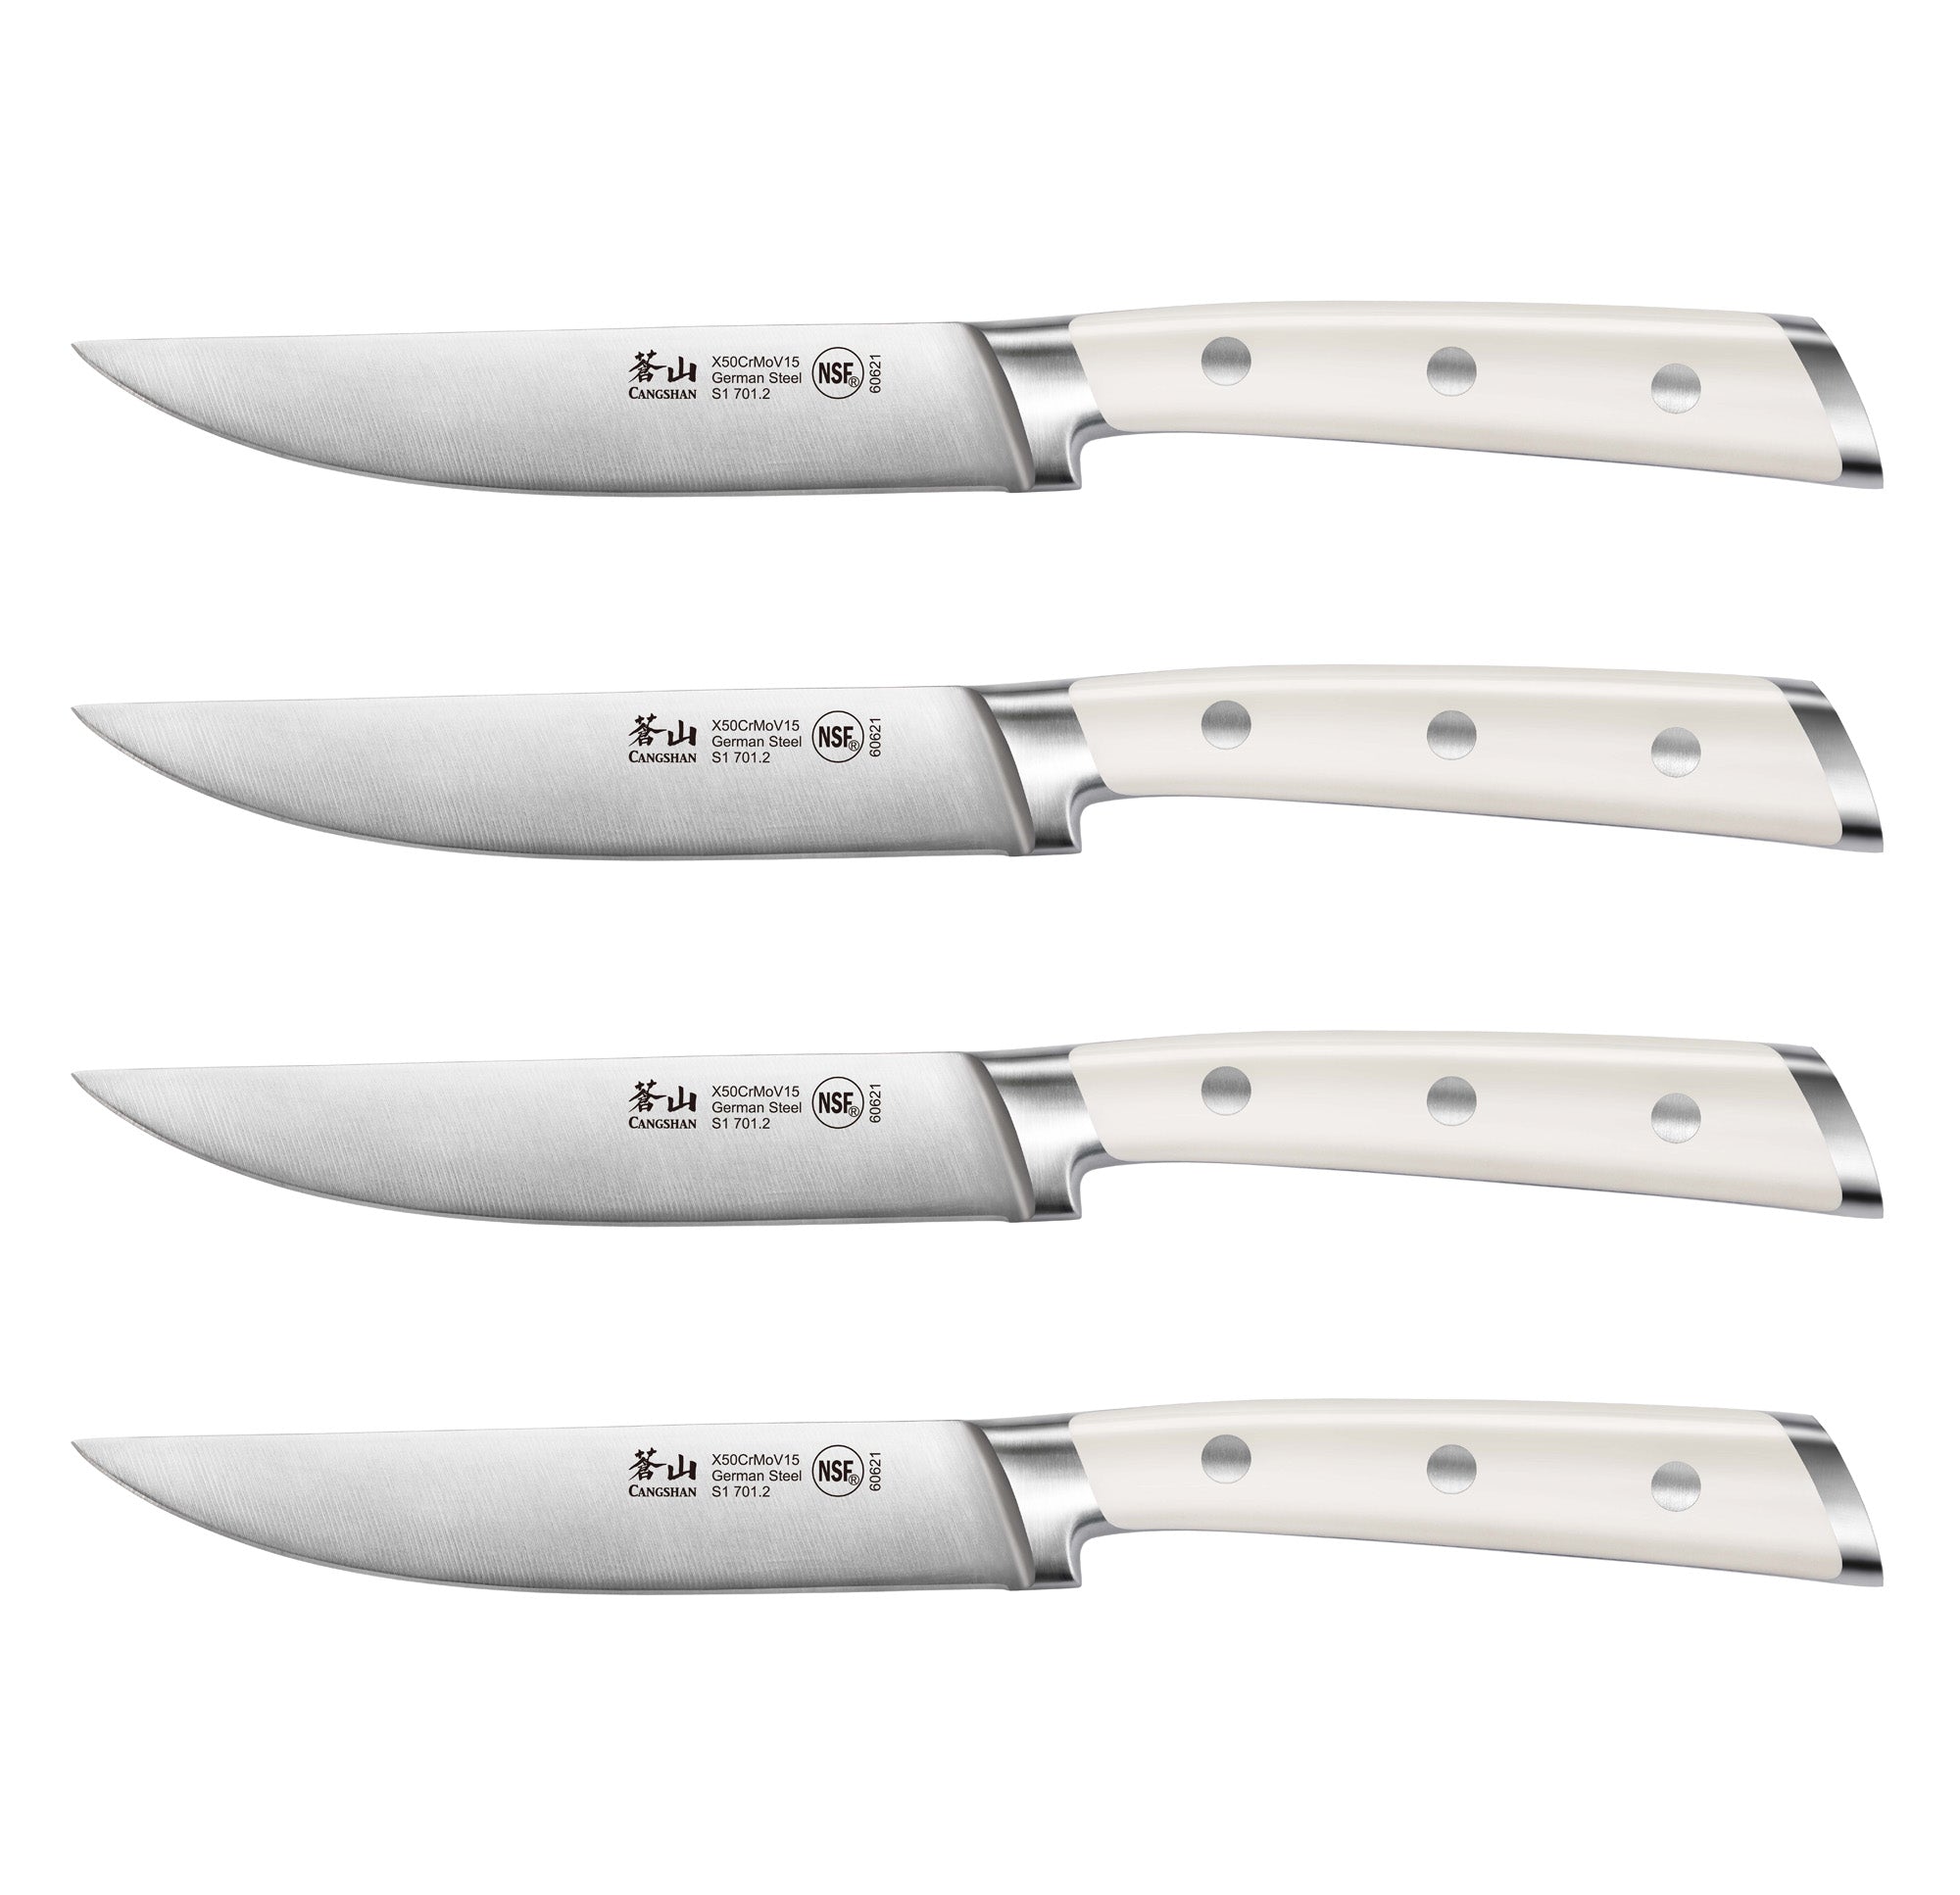 Wusthof Classic Ikon Steak Knives - 6 Piece Set with Case